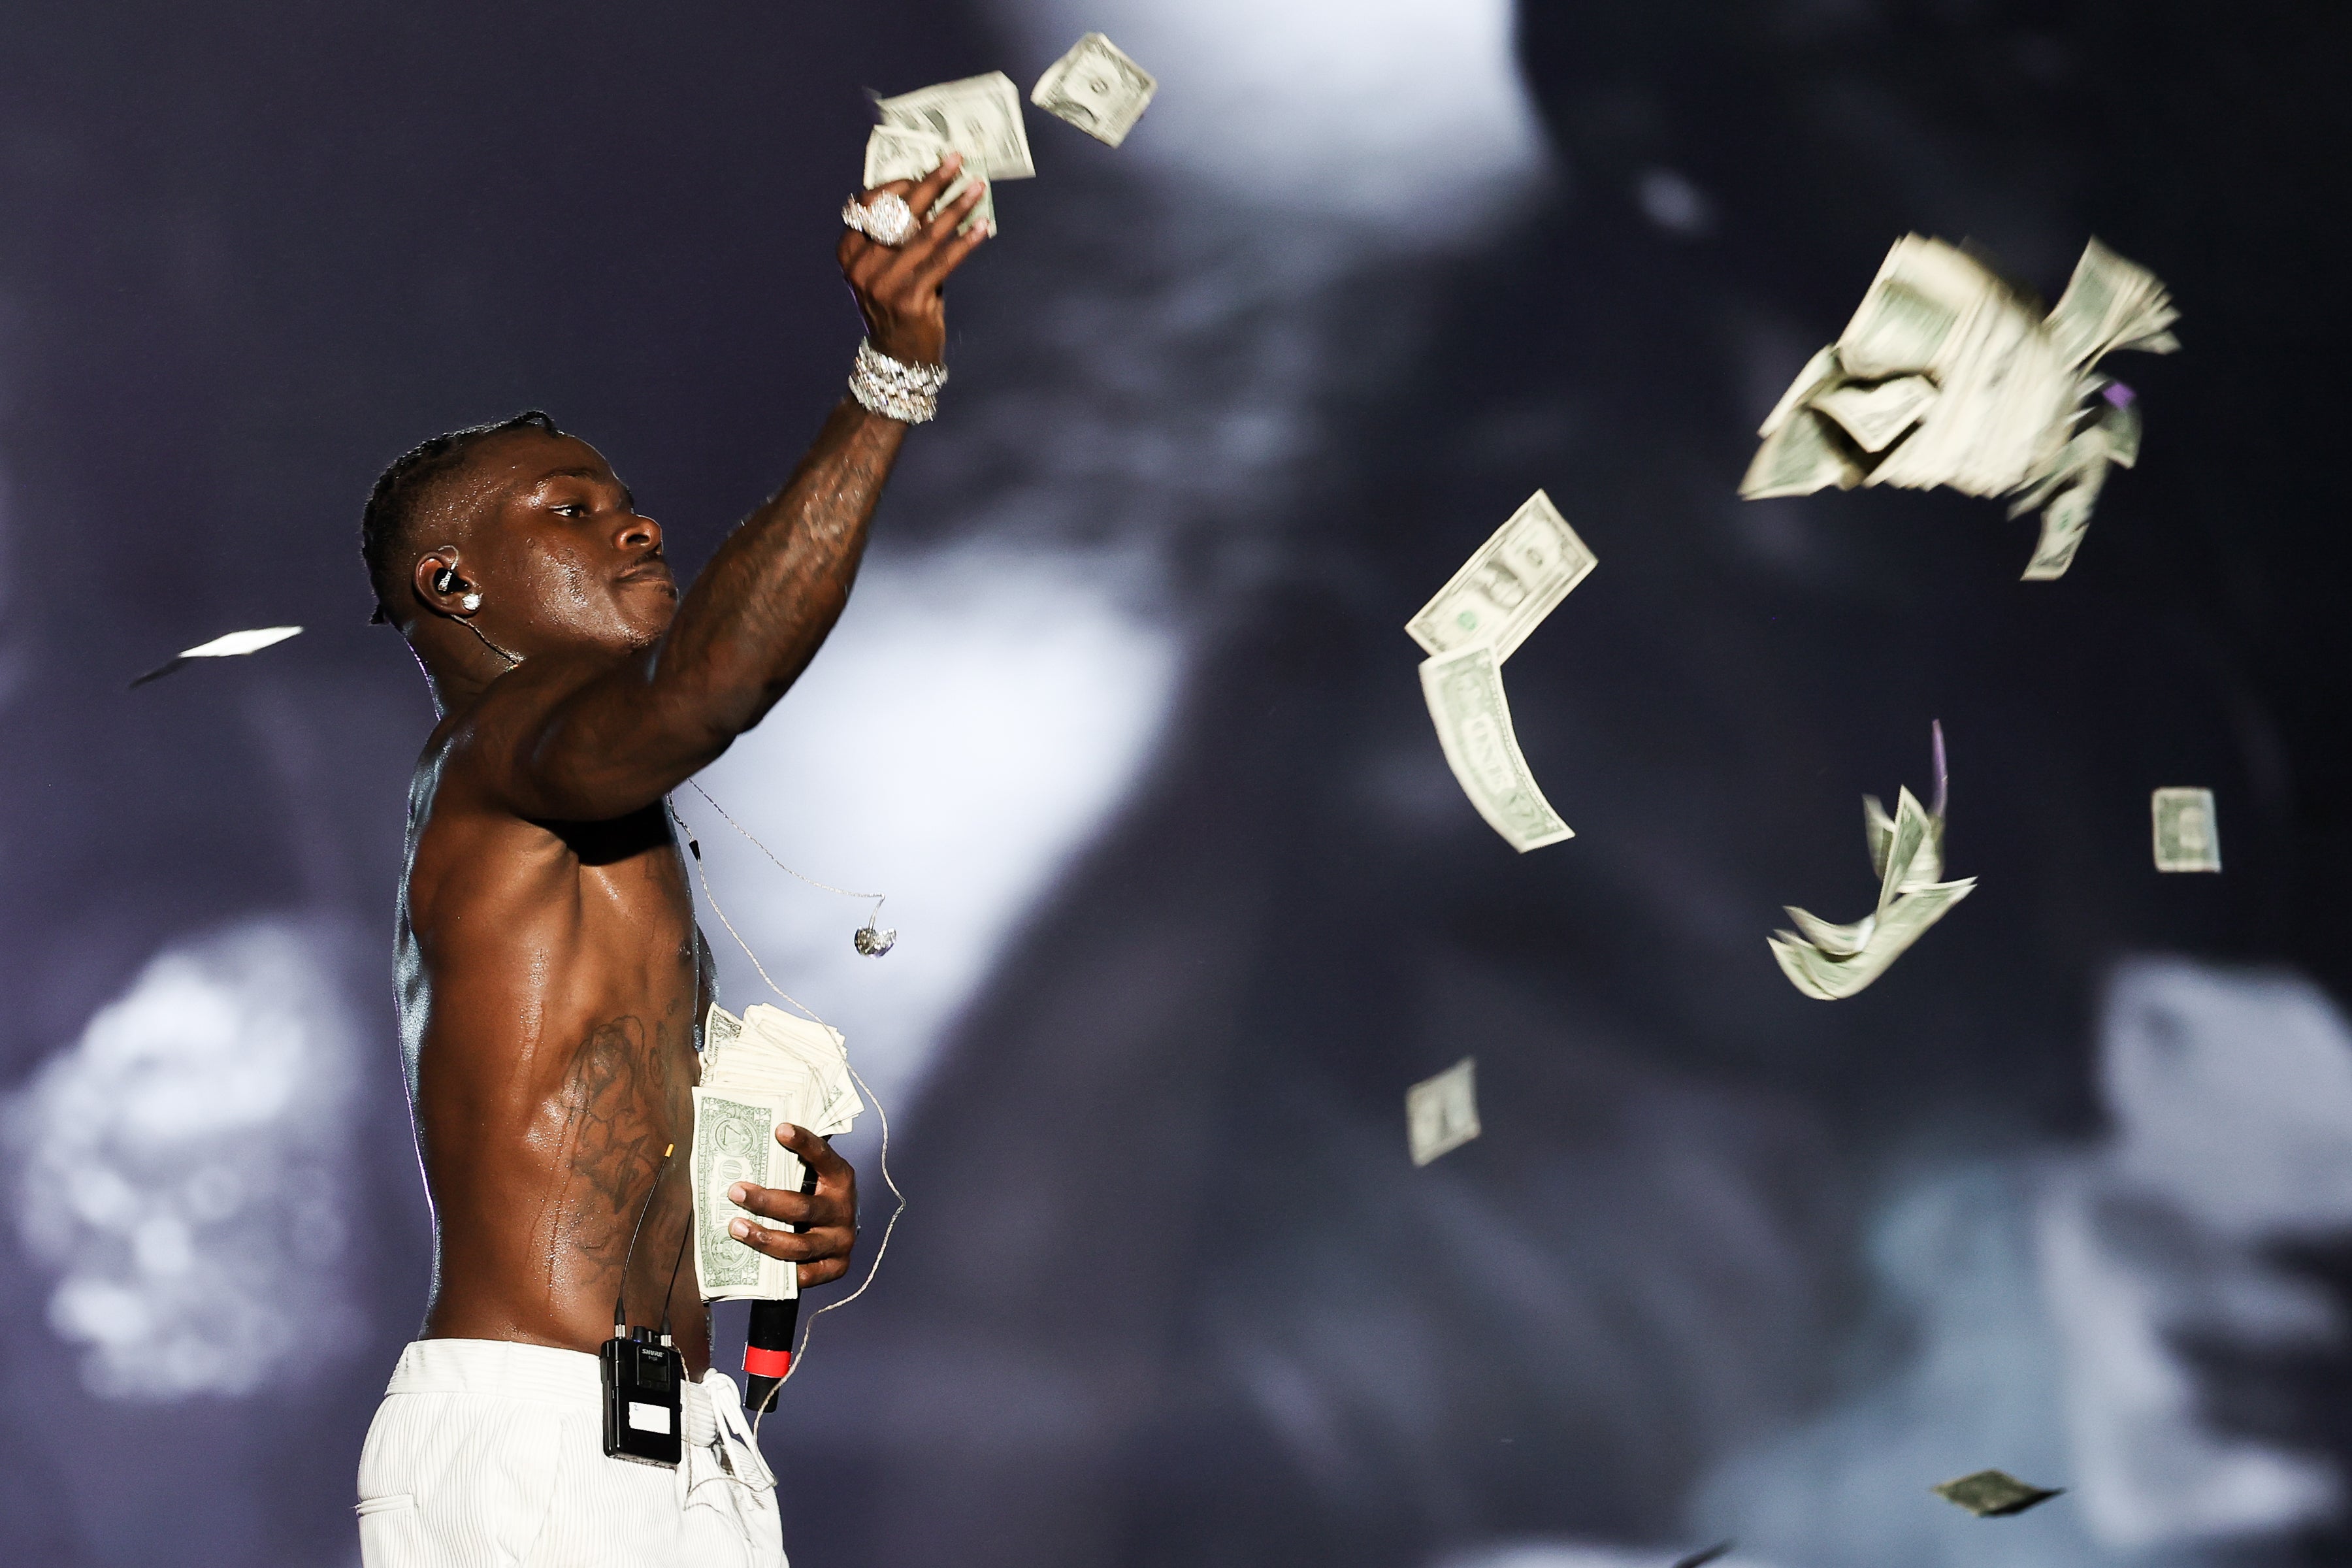 File image: DaBaby performs on stage during Rolling Loud at Hard Rock Stadium in 2021